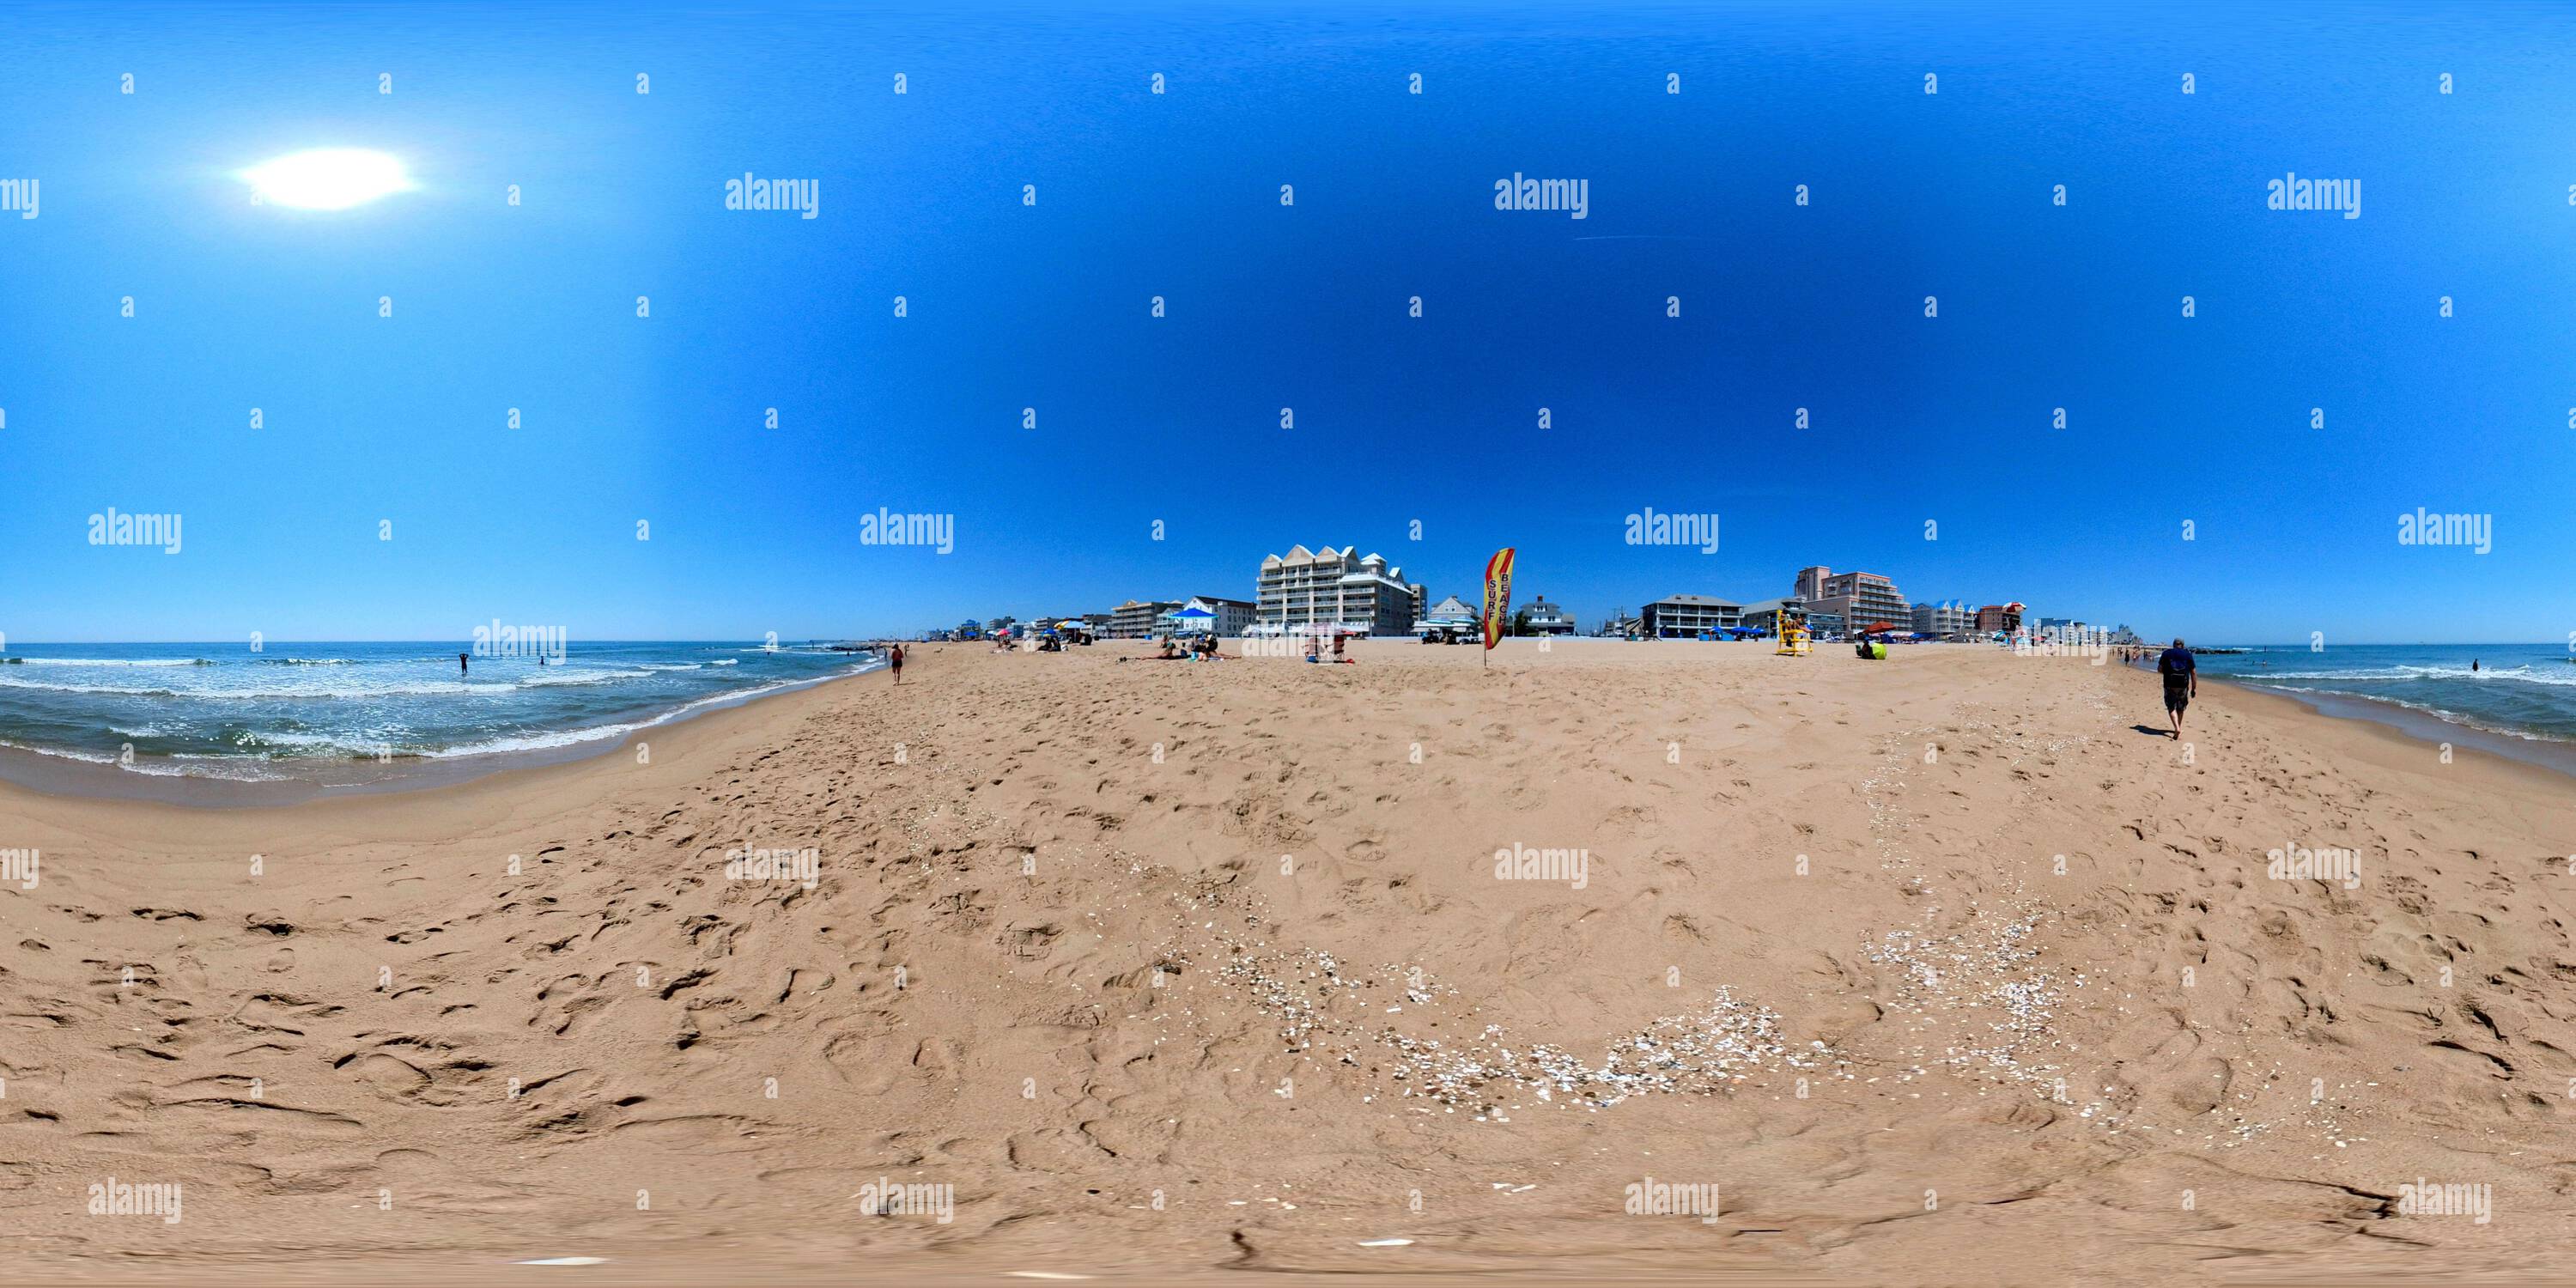 360 degree panoramic view of On the beach in Ocean City, Maryland near 6th Street